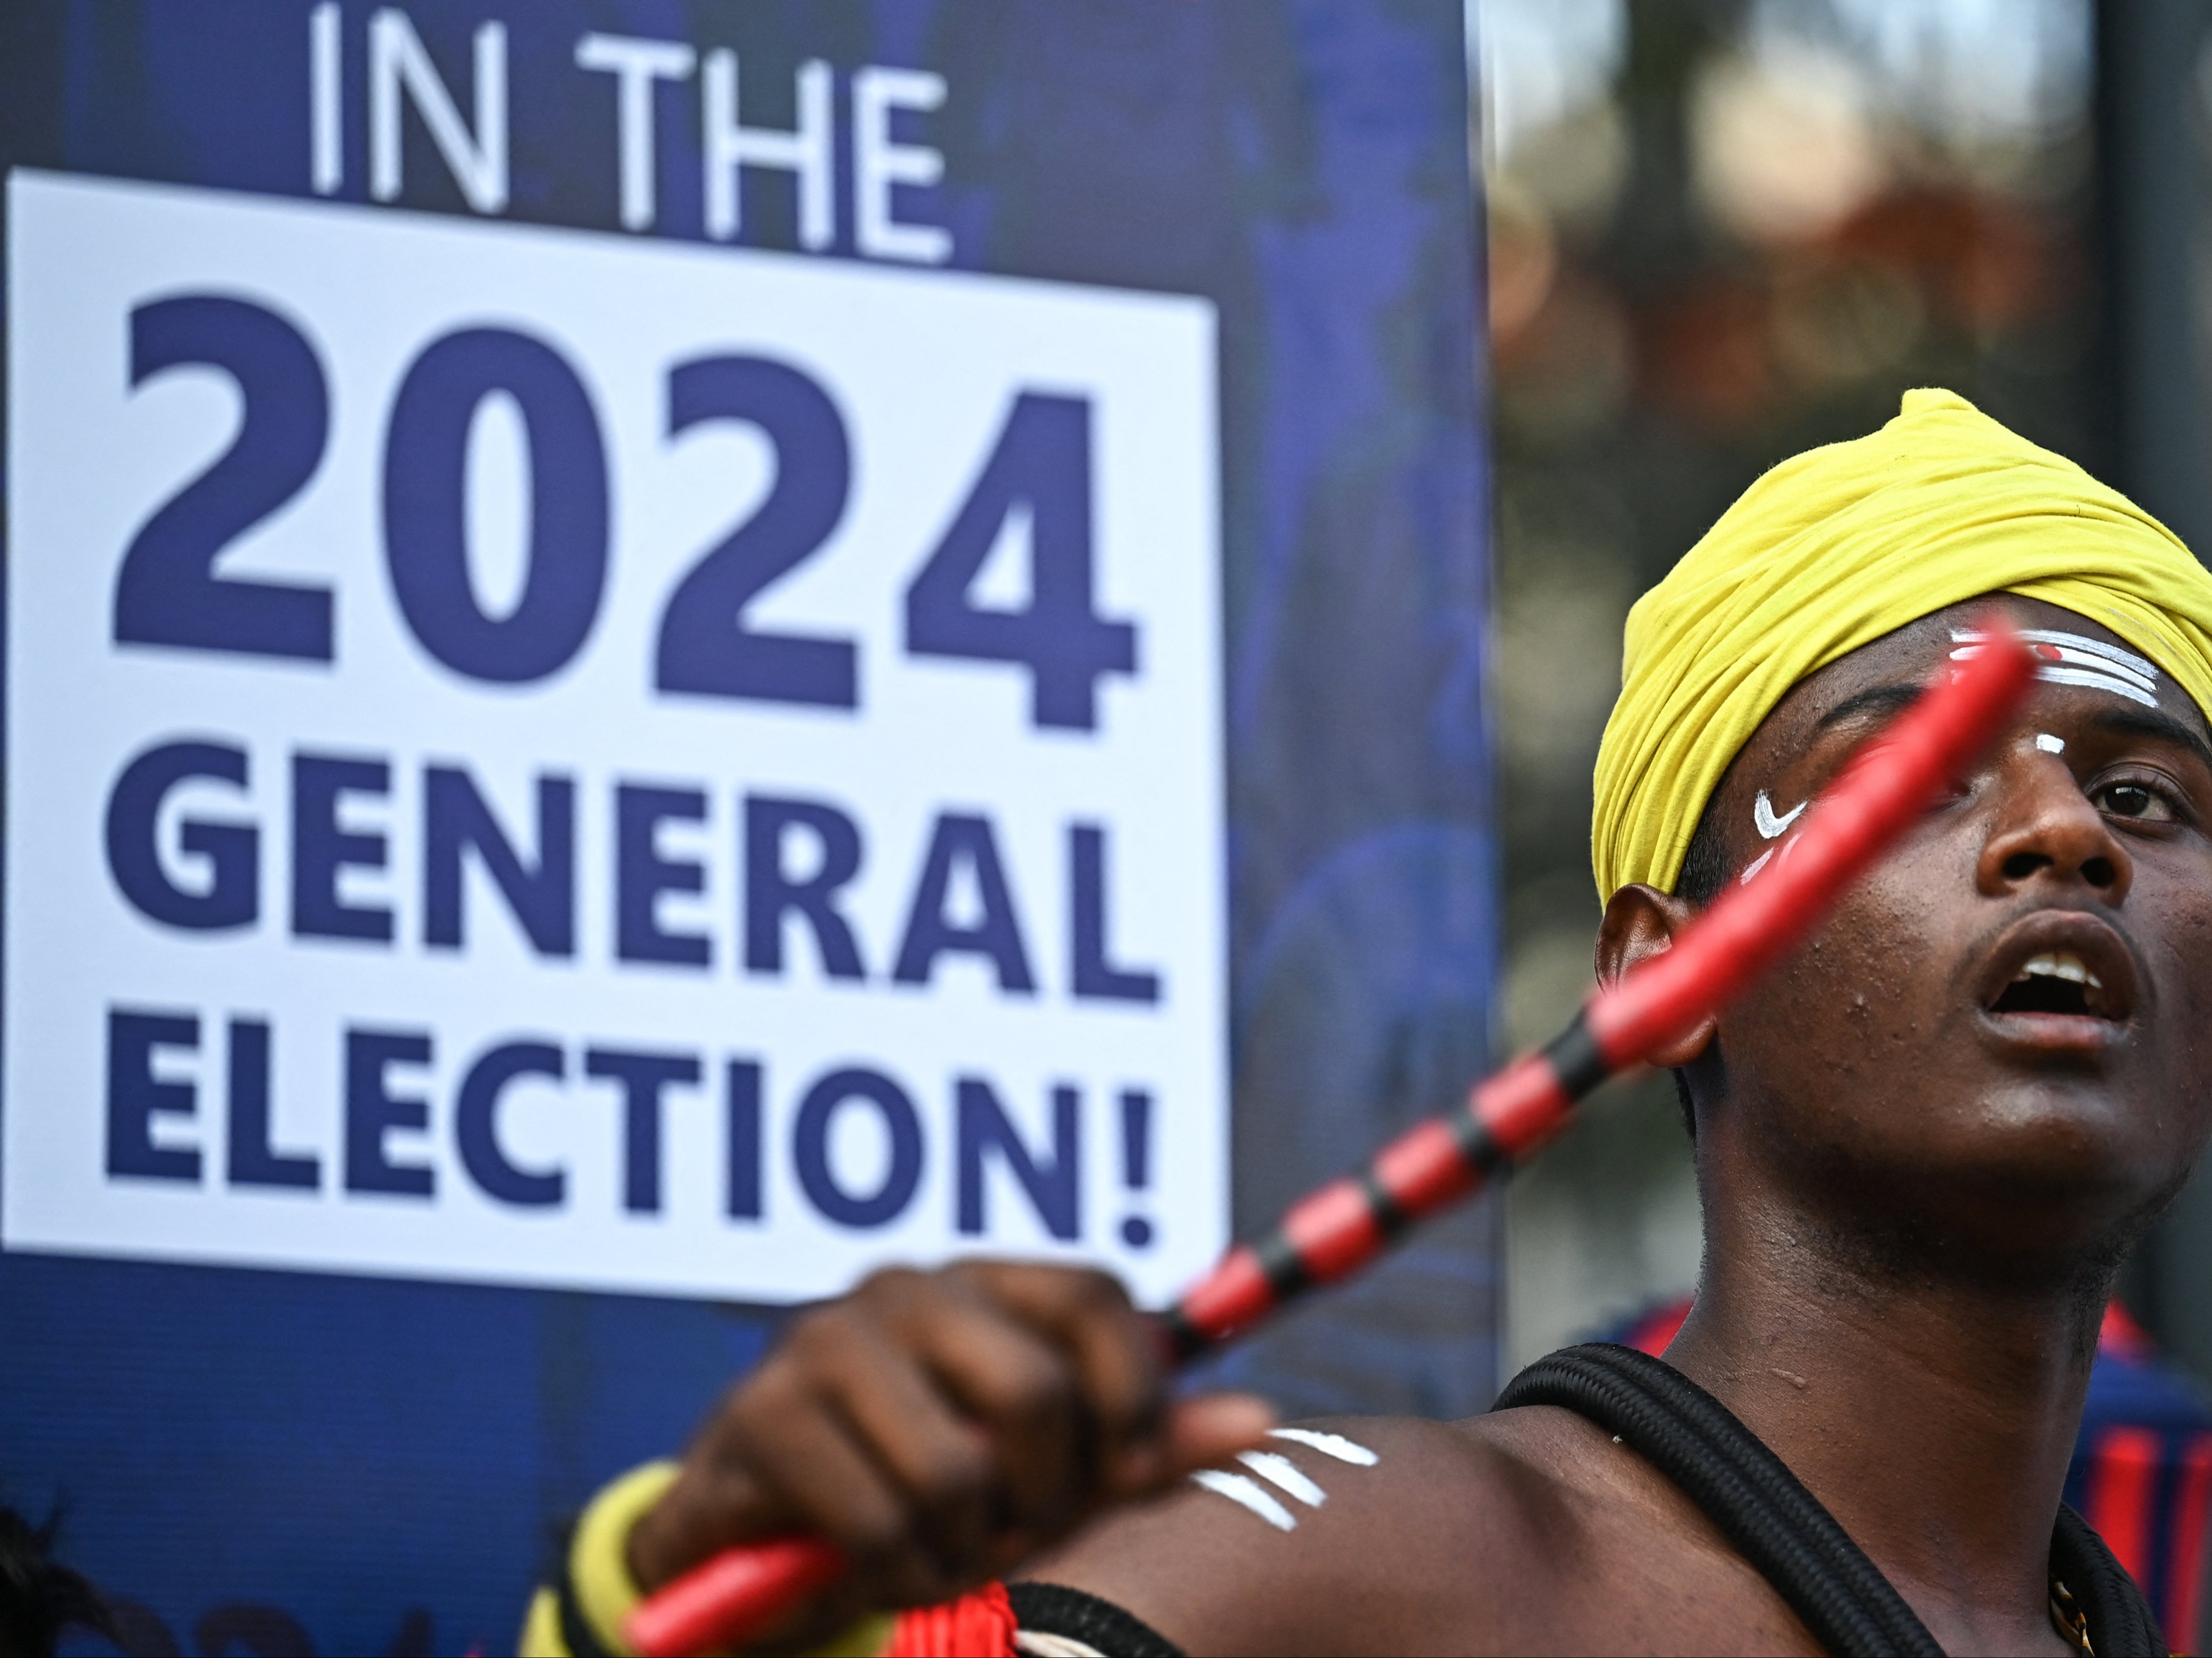 An artist dressed in traditional attire performs in front of an election sign board during the Vote-A-Thon, an awareness campaign organised by Karnataka’s Chief Electoral Office to encourage turnout for the upcoming 2024 general elections, in Bengaluru on 17 March 2024